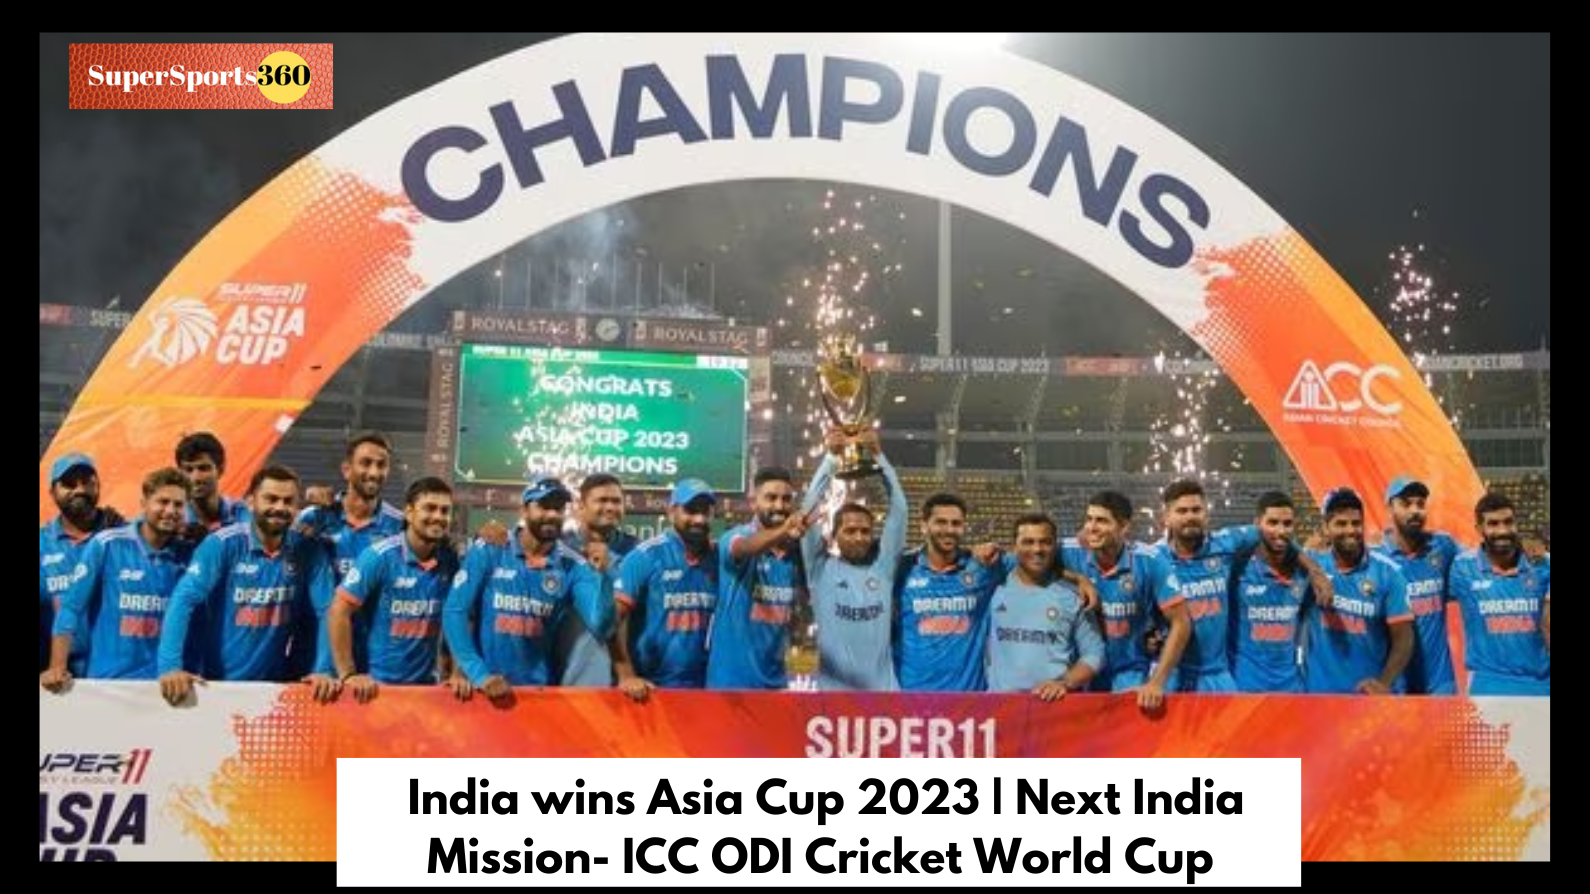 India wins Asia Cup 2023 | Next India Mission- ICC ODI Cricket World Cup